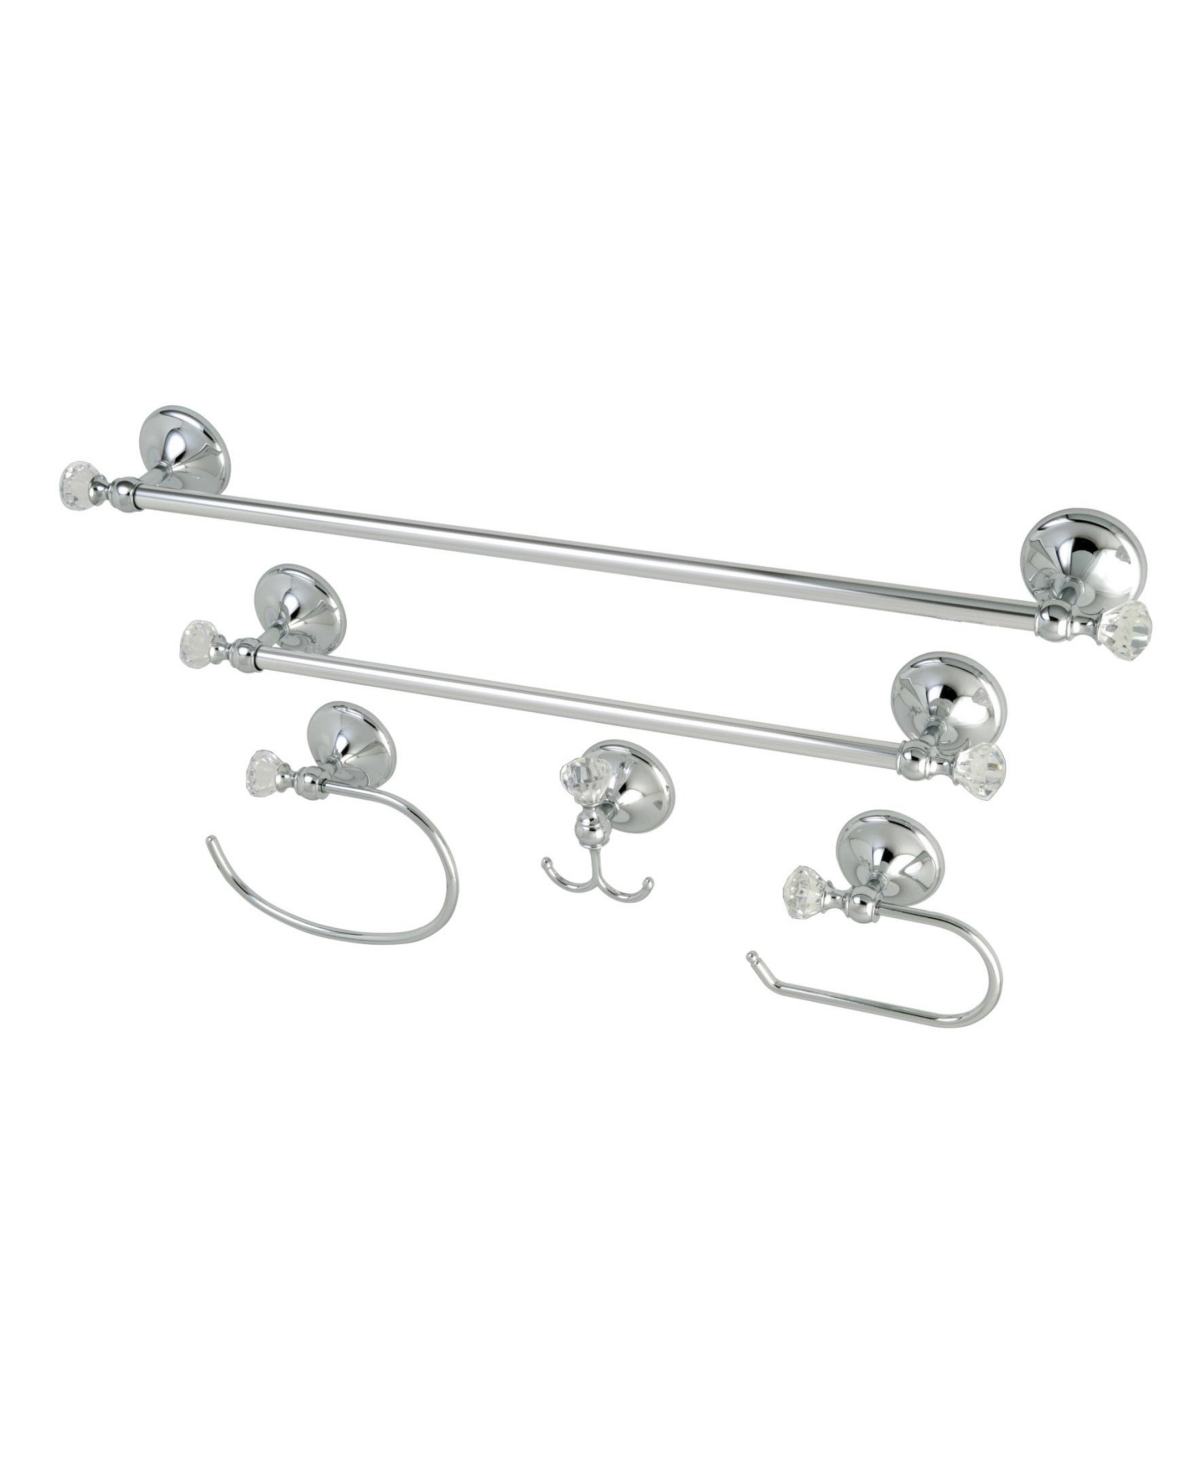 Kingston Brass Celebrity 18-Inch and 24-Inch Towel Bar Bathroom Accessory Set in Polished Chrome Bedding